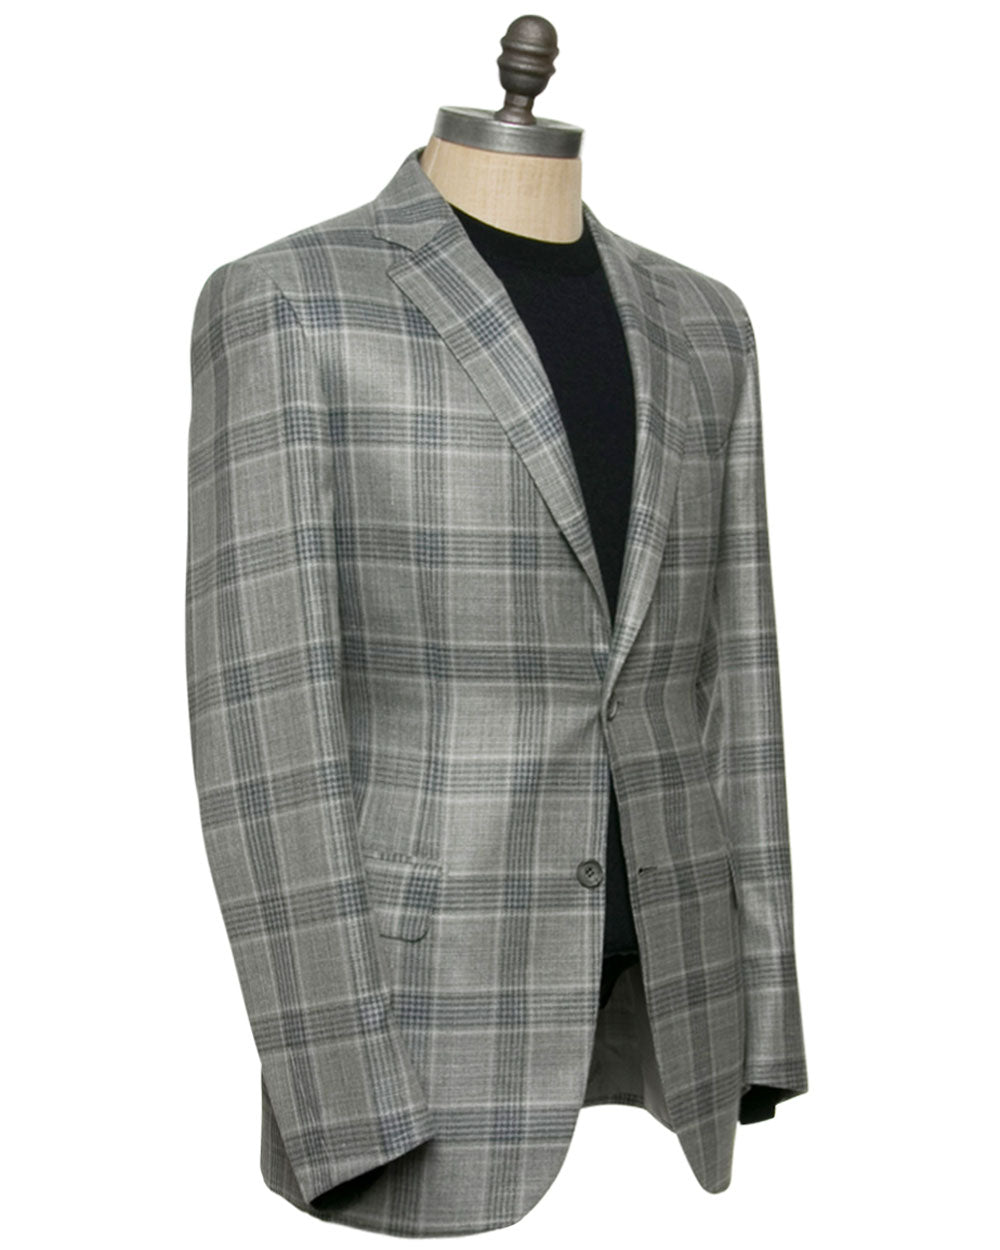 Grey and Charcoal Plaid Sportcoat